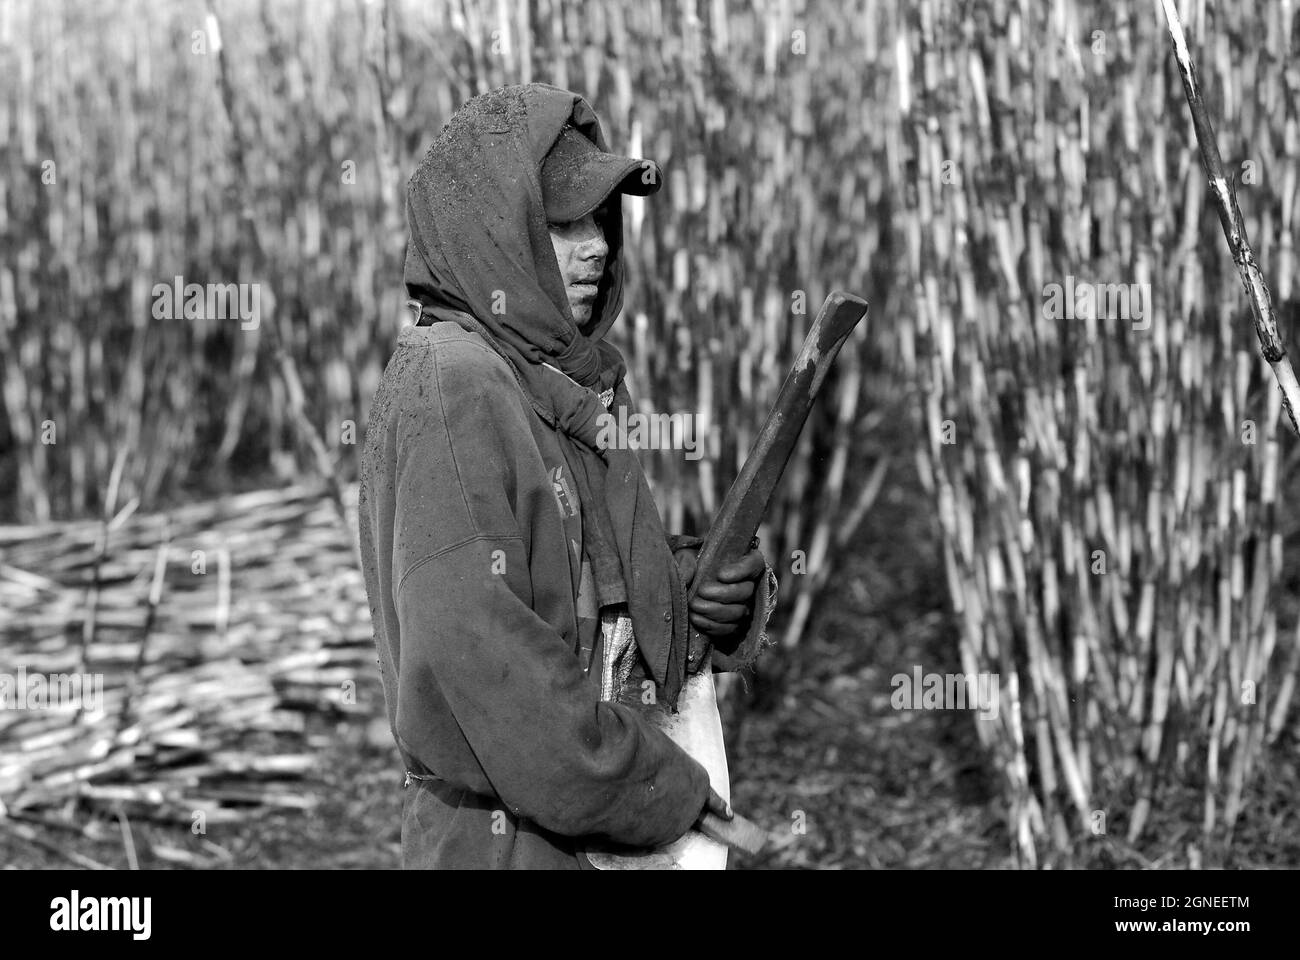 A Mexican boy who works at the sugarcane plots, in Ahualulco, Jalisco, Mexico. March 31, 2007. Stock Photo